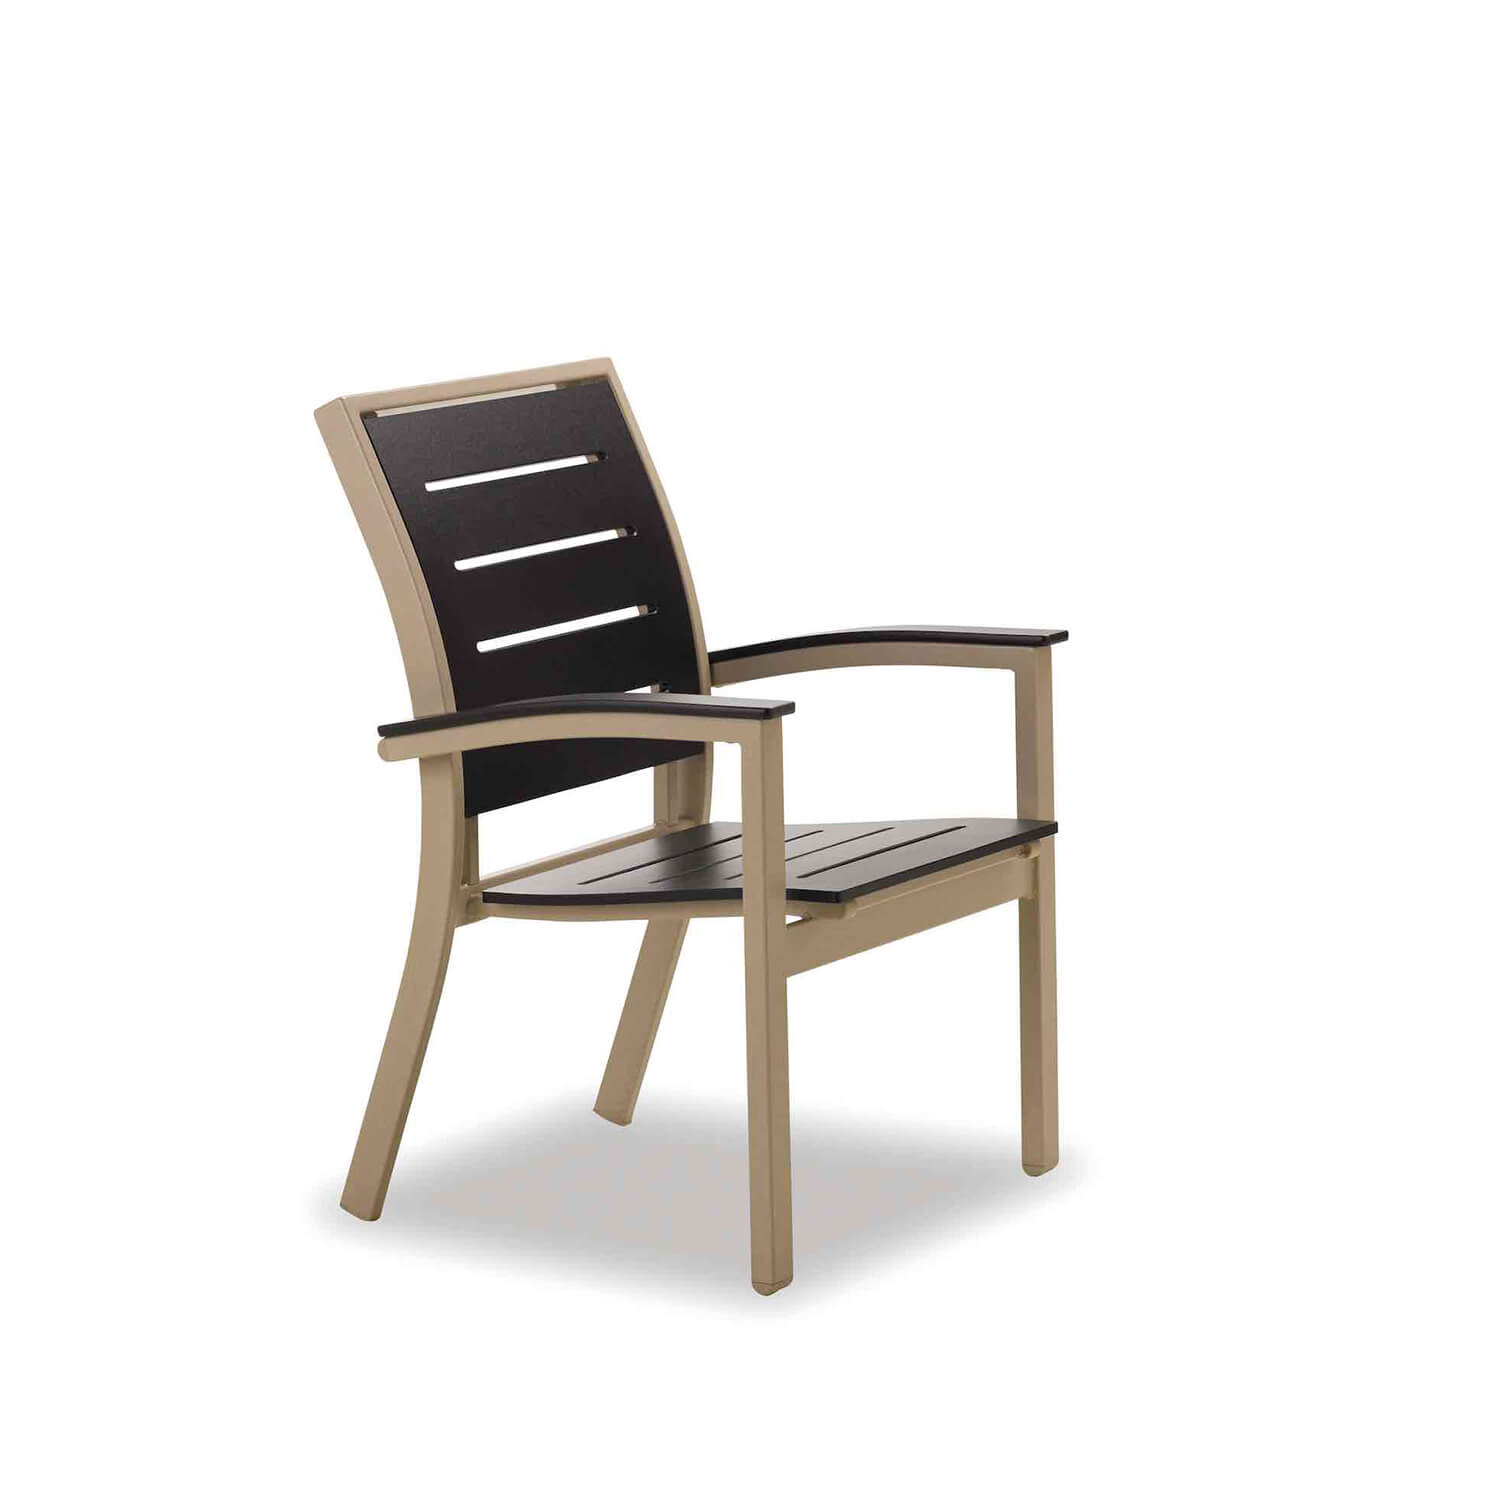 Bazza MGP Dining Height Stacking Cafe Chair